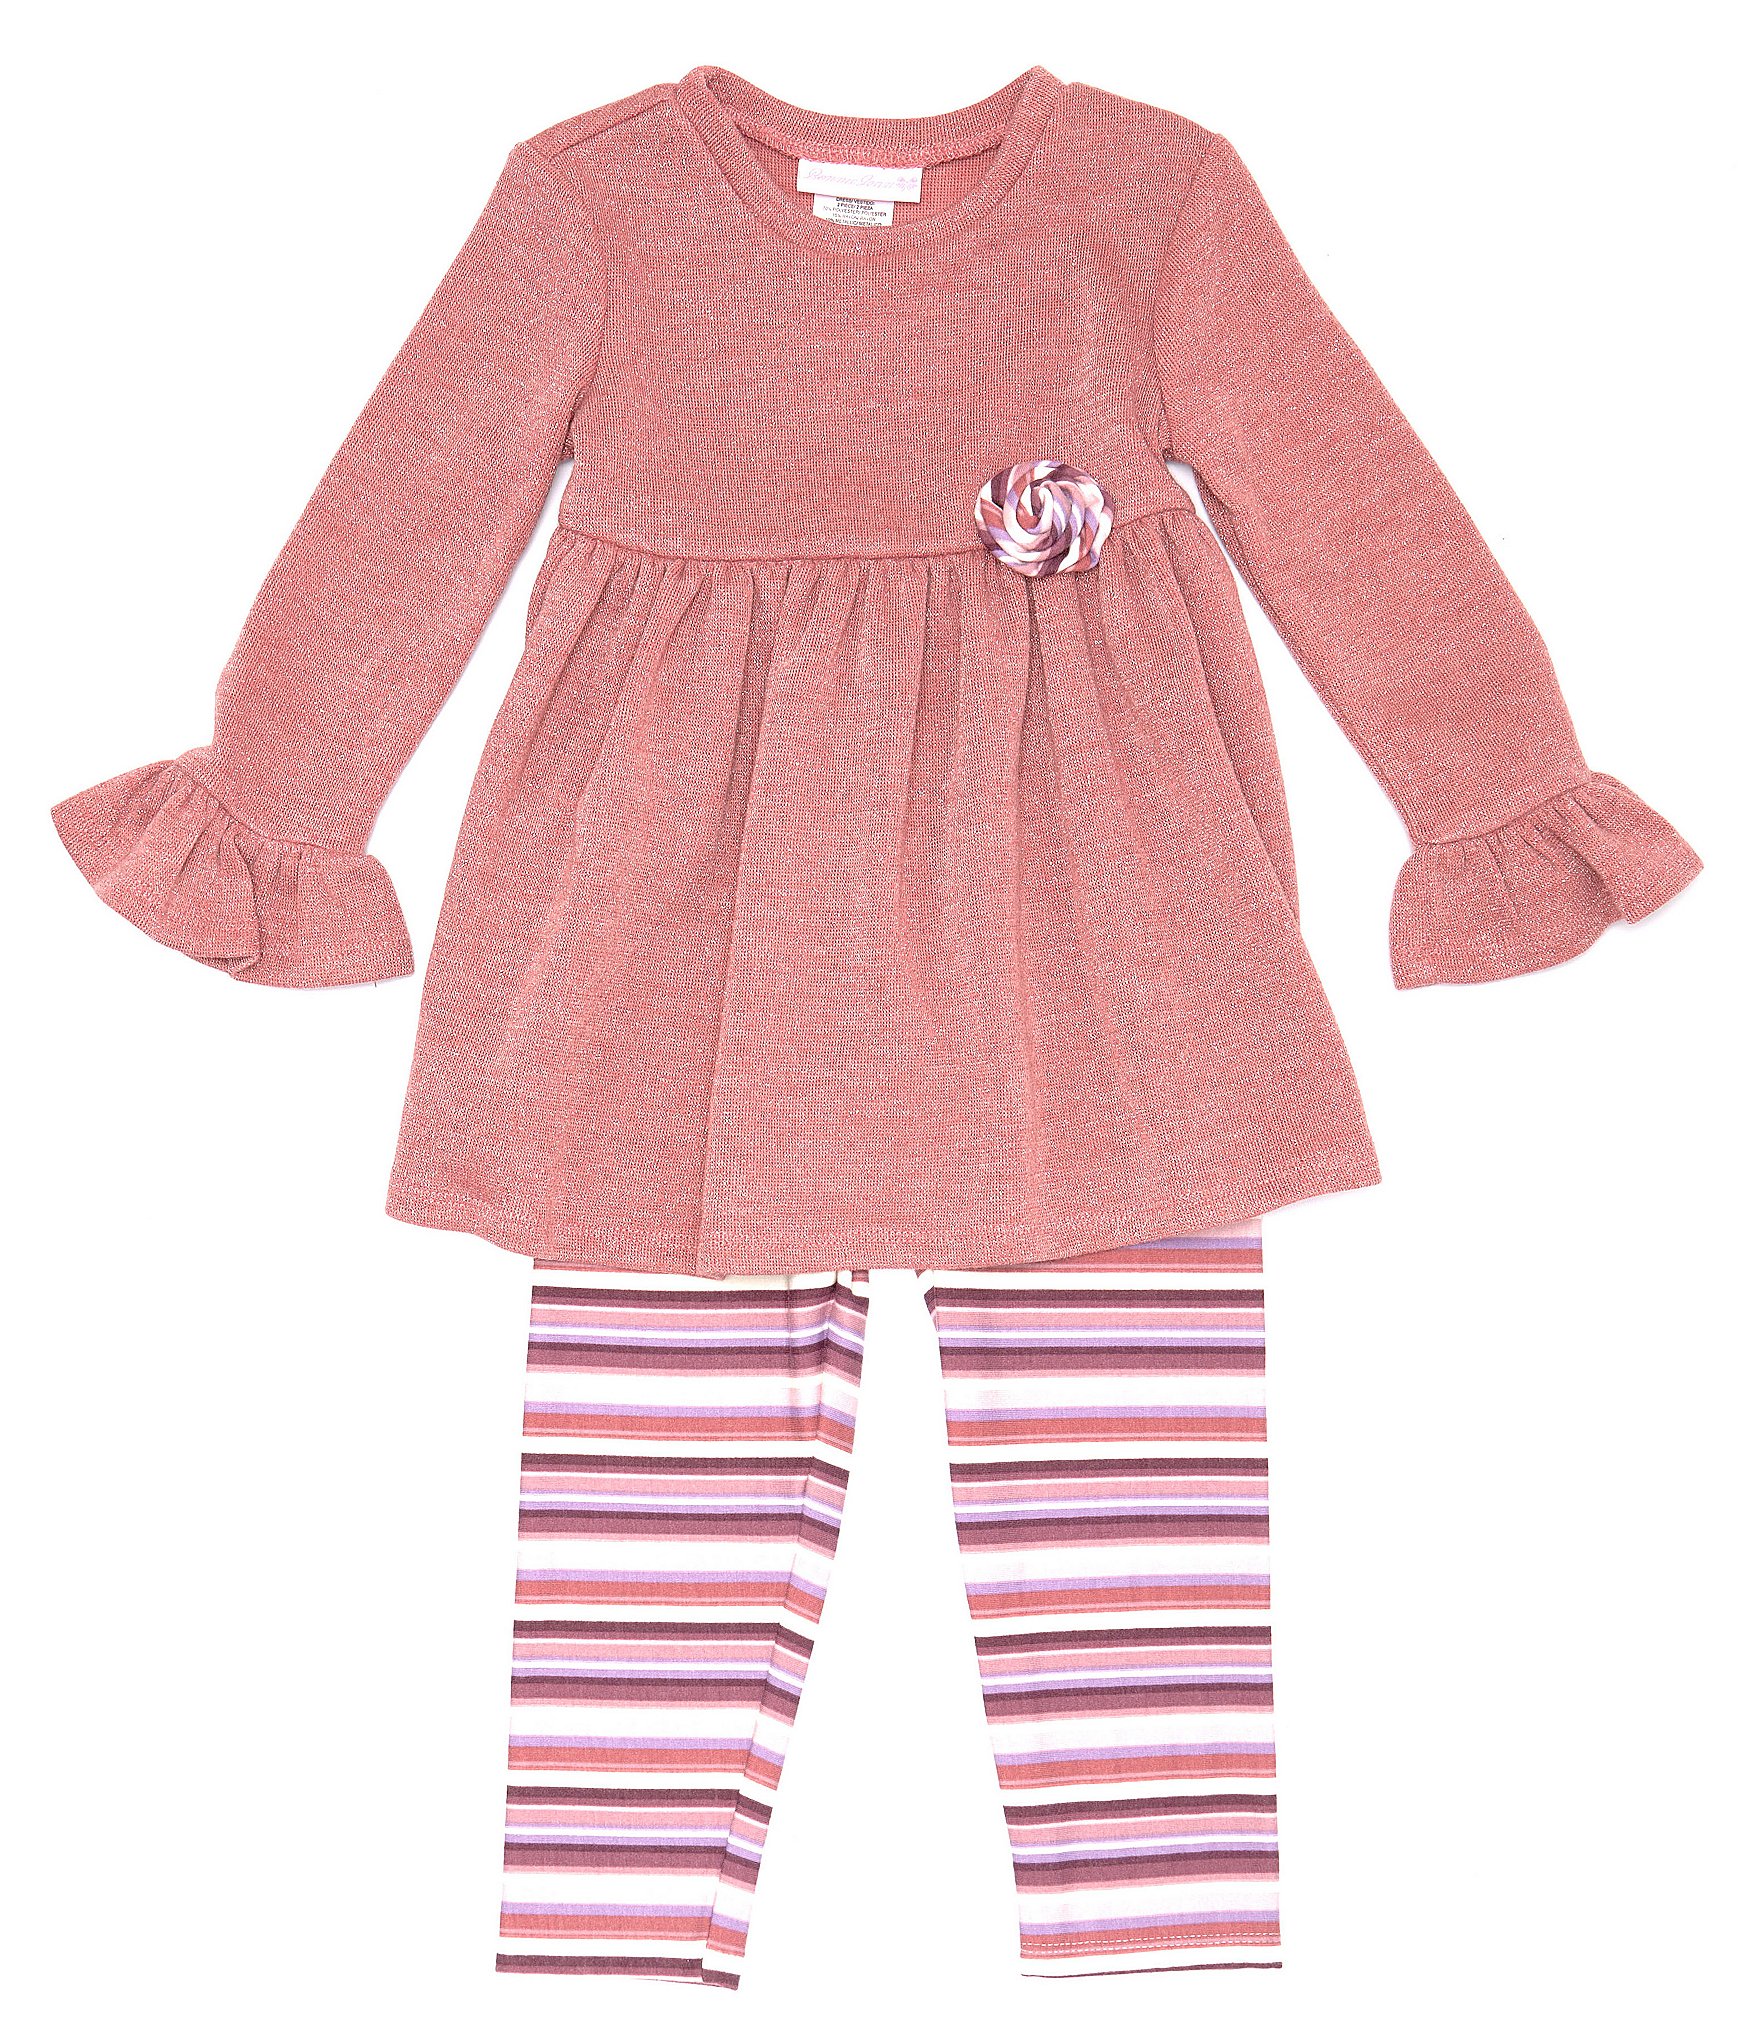 Sale & Clearance Girls' Outfits & Sets